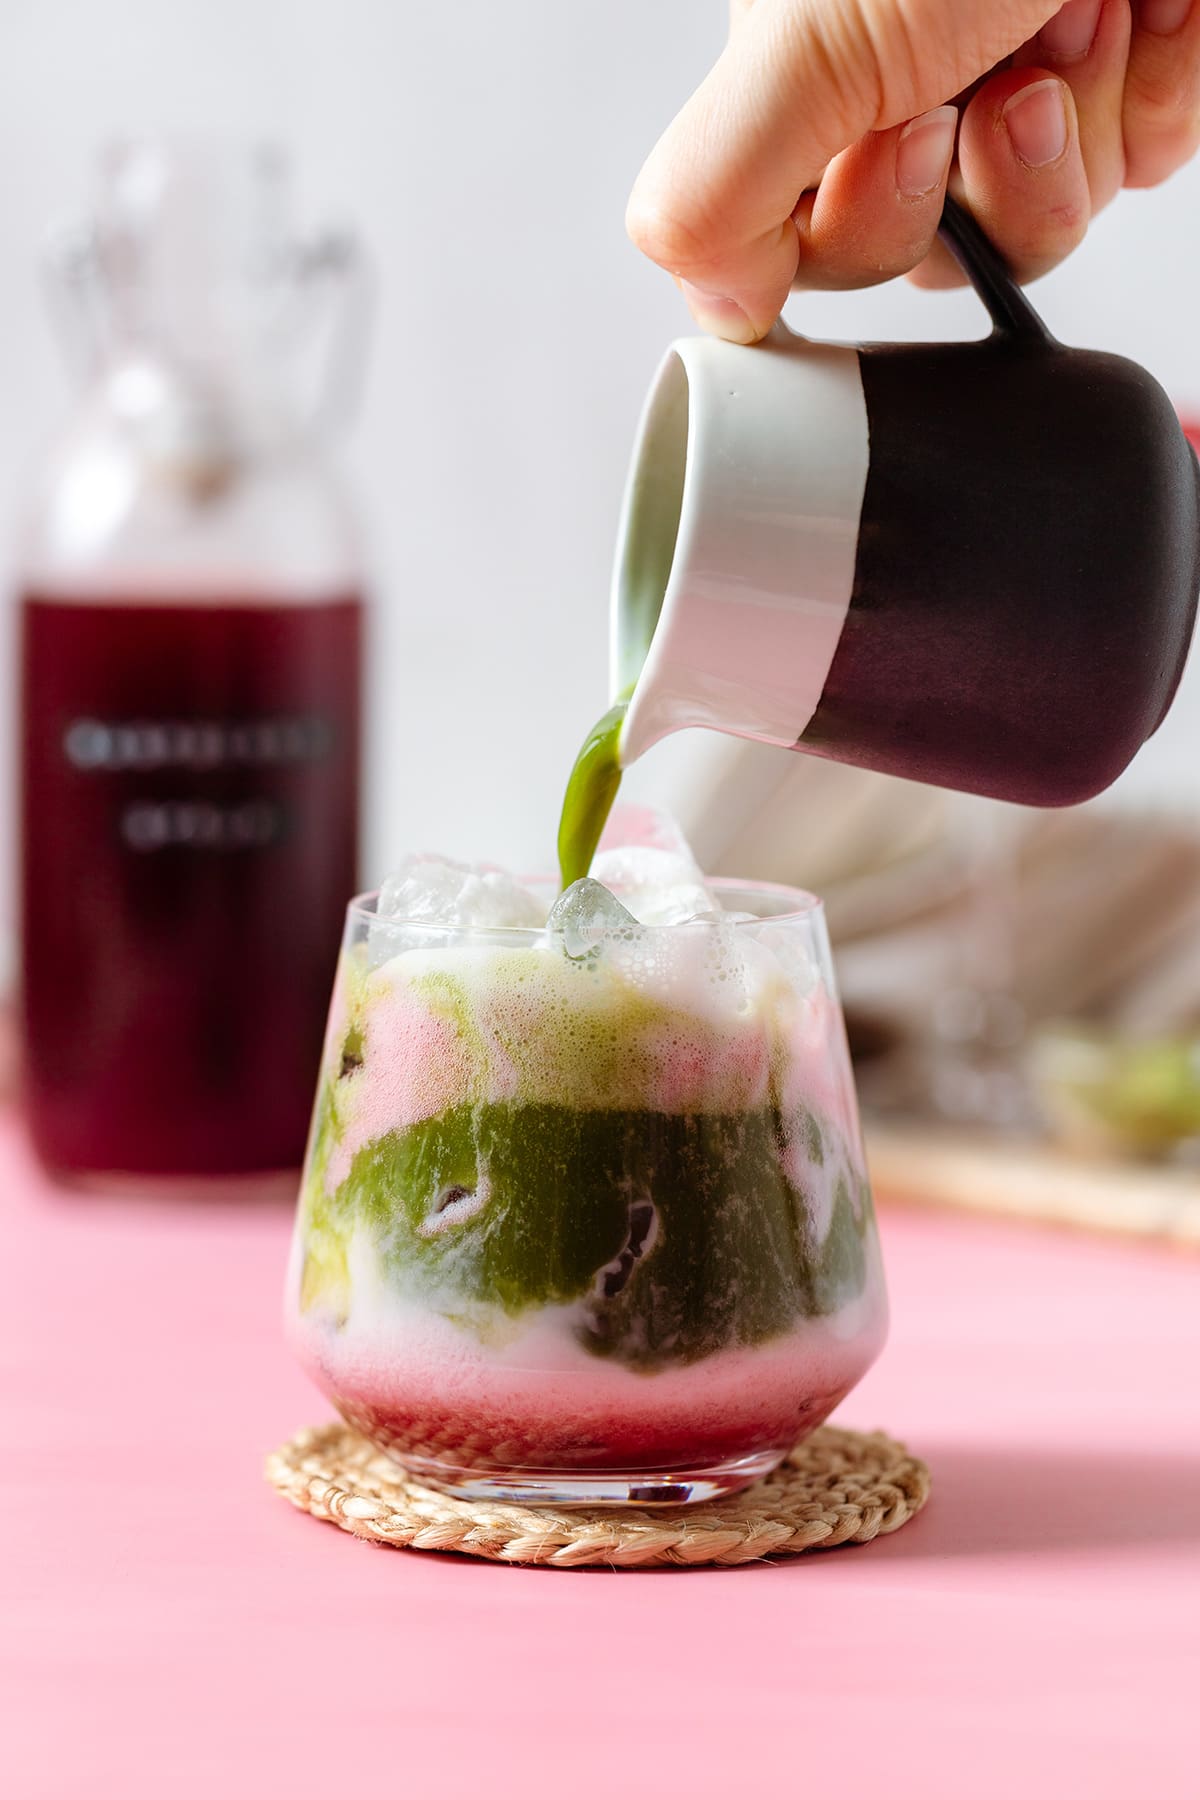 Matcha being poured into a glass with almond milk and raspberry syrup on a pink background.